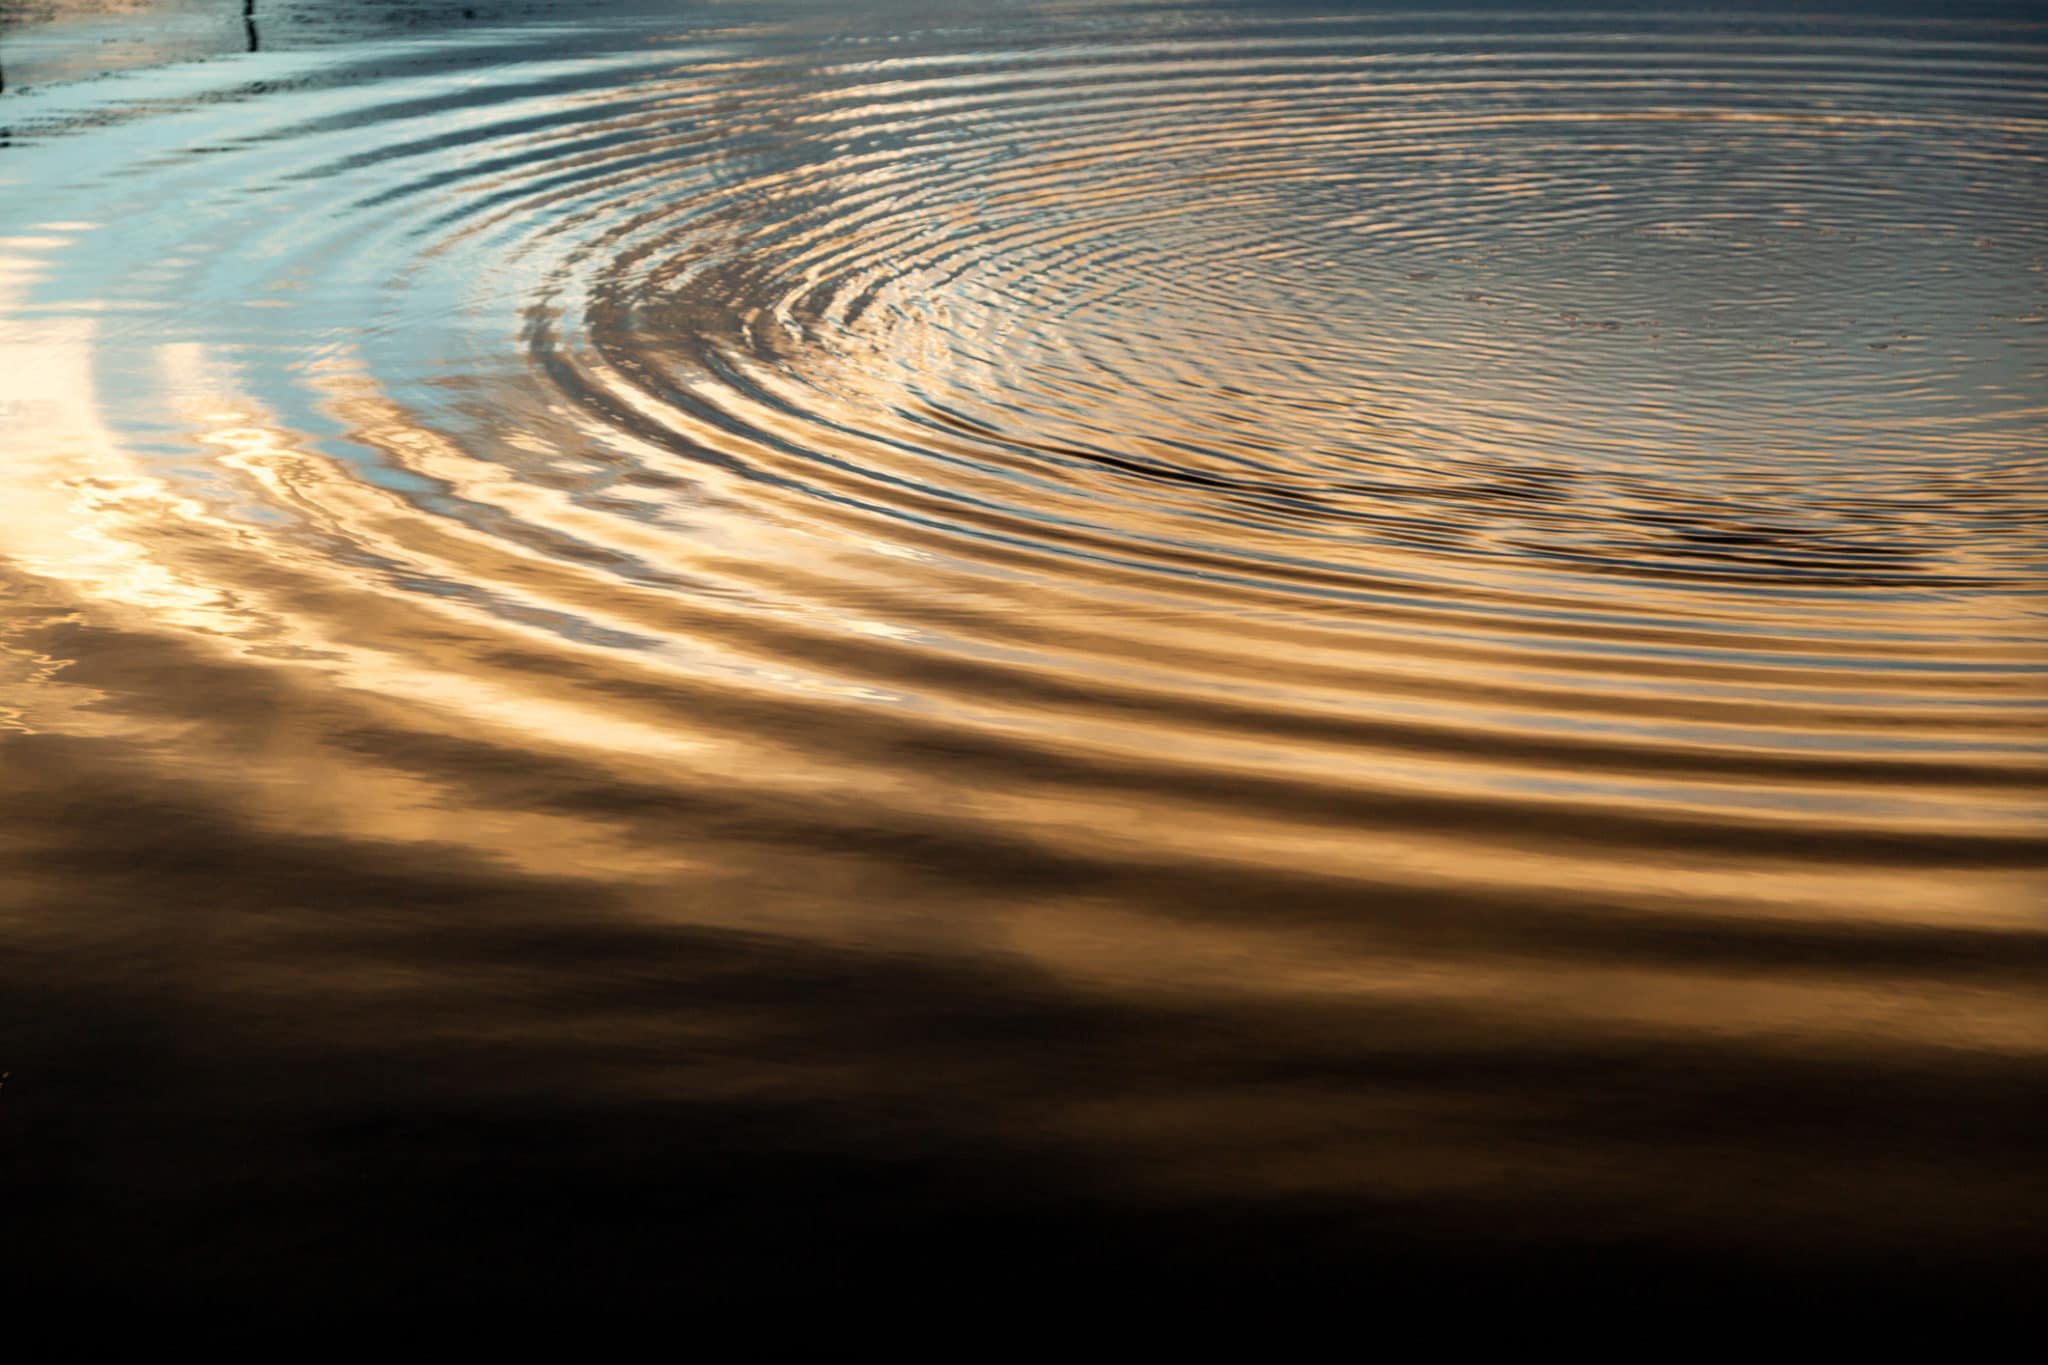 Ripples on a lake surface with a golden sunrise